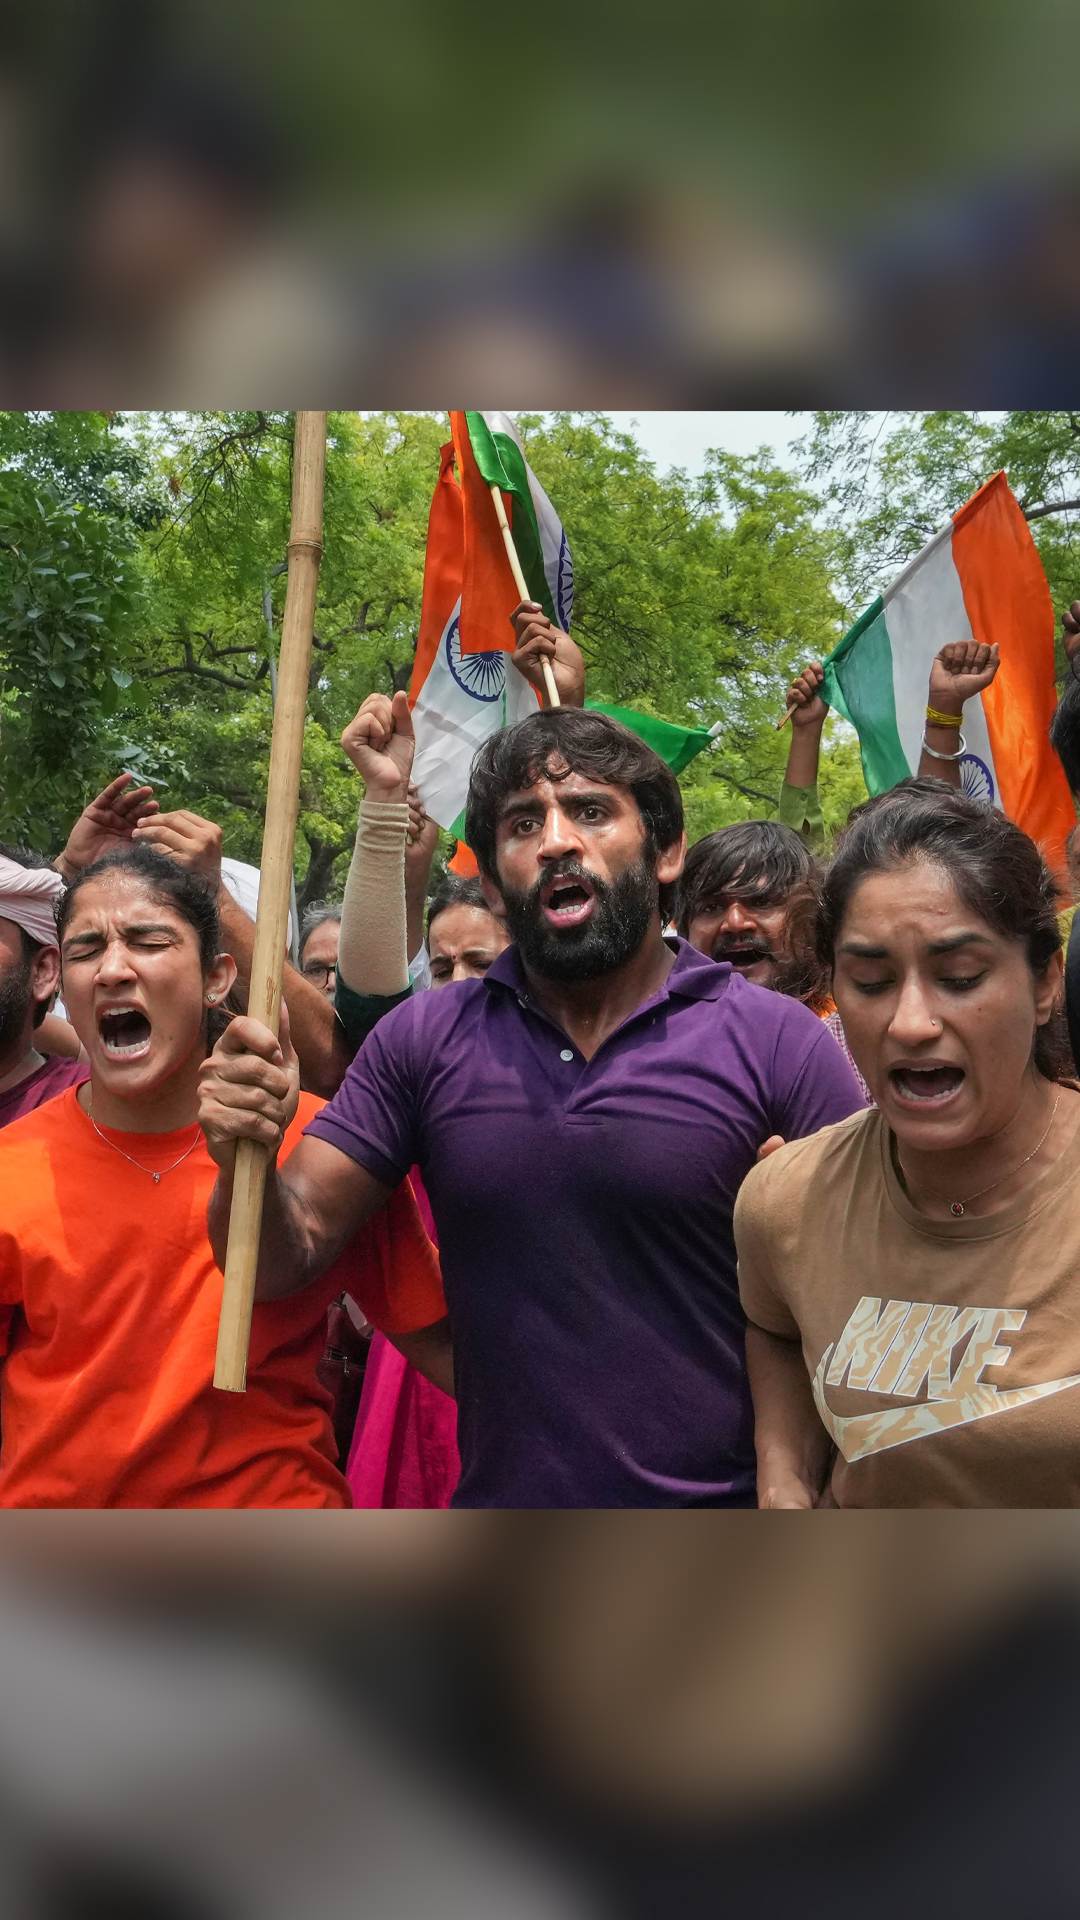 Wrestlers Vinesh Phogat, Sangeeta Phogat and Bajrang Punia with supporters during their protest march 